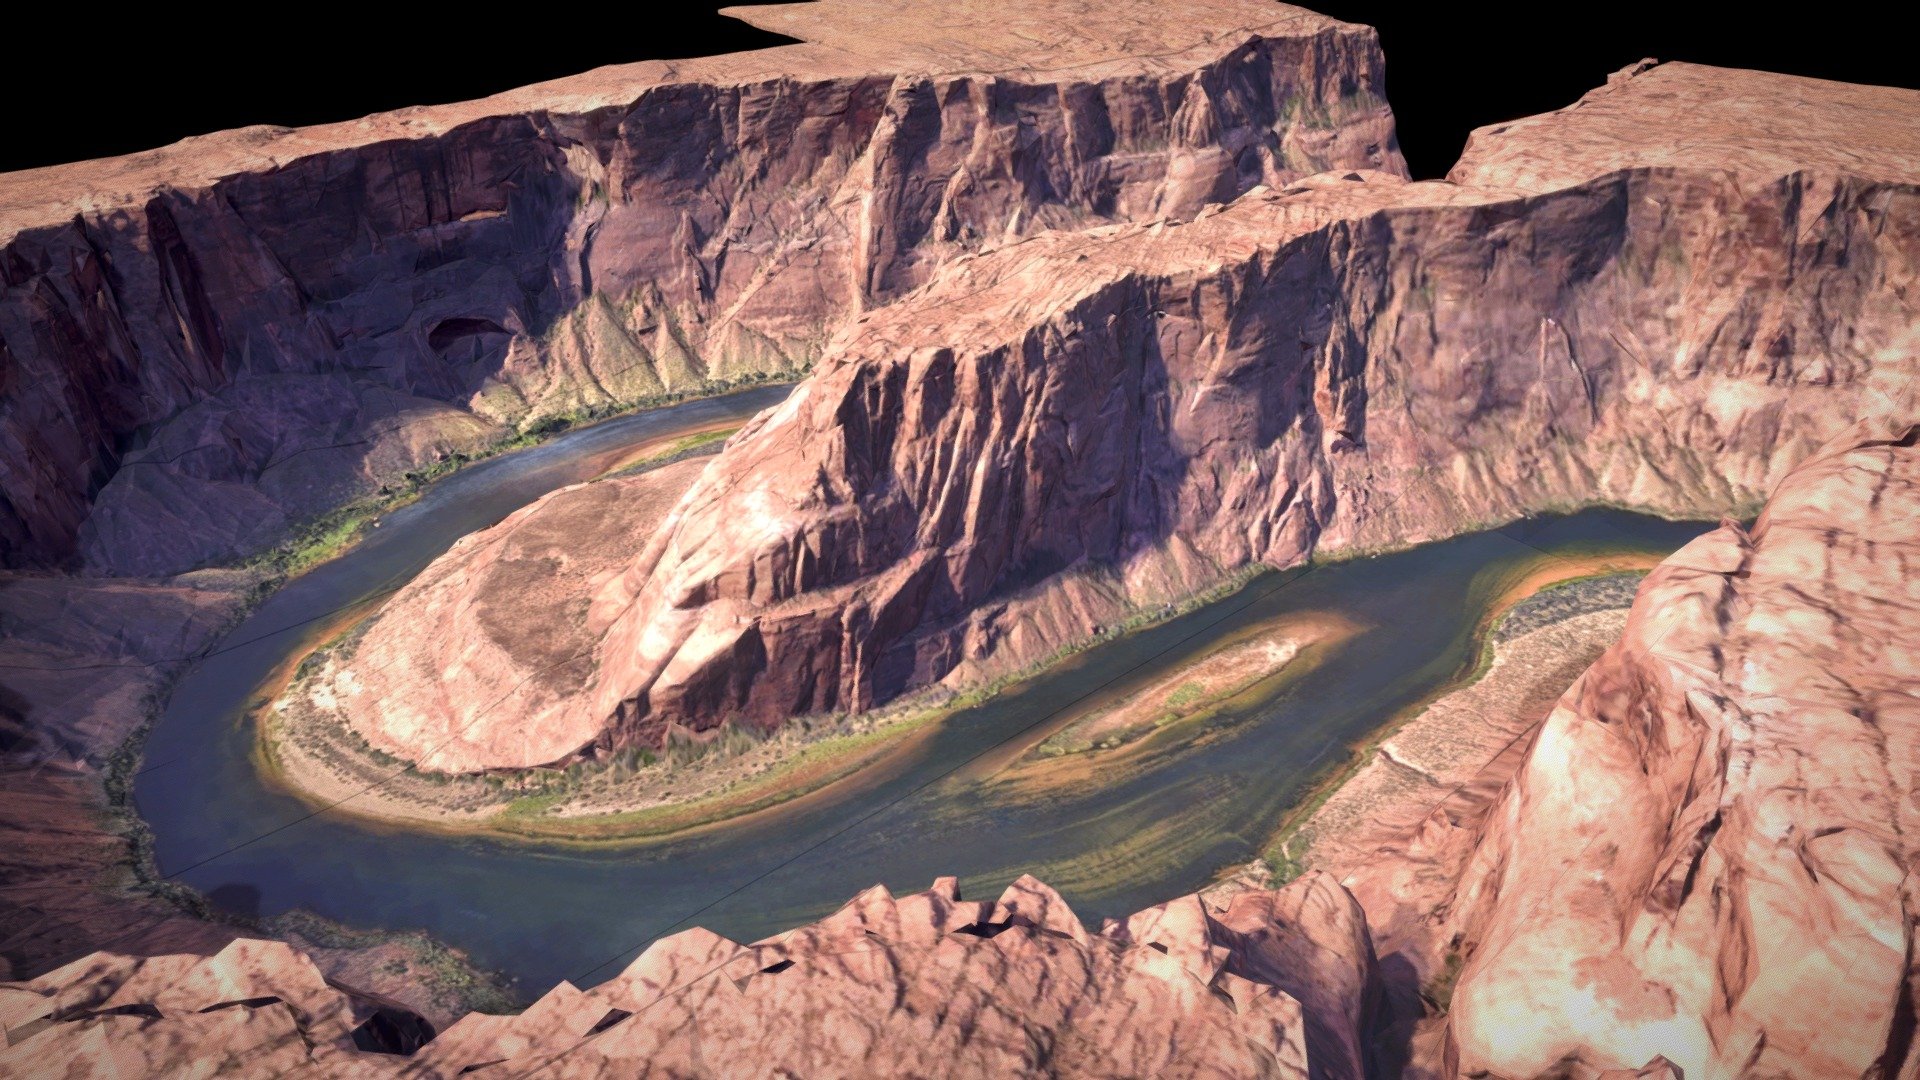 Horseshoe bend near Grand Canyon.
Imported from Google Maps with RenderDoc and Blender - Horseshoe bend near Grand Canyon - Download Free 3D model by Ignazio Pillitteri (@gnaz) 3d model